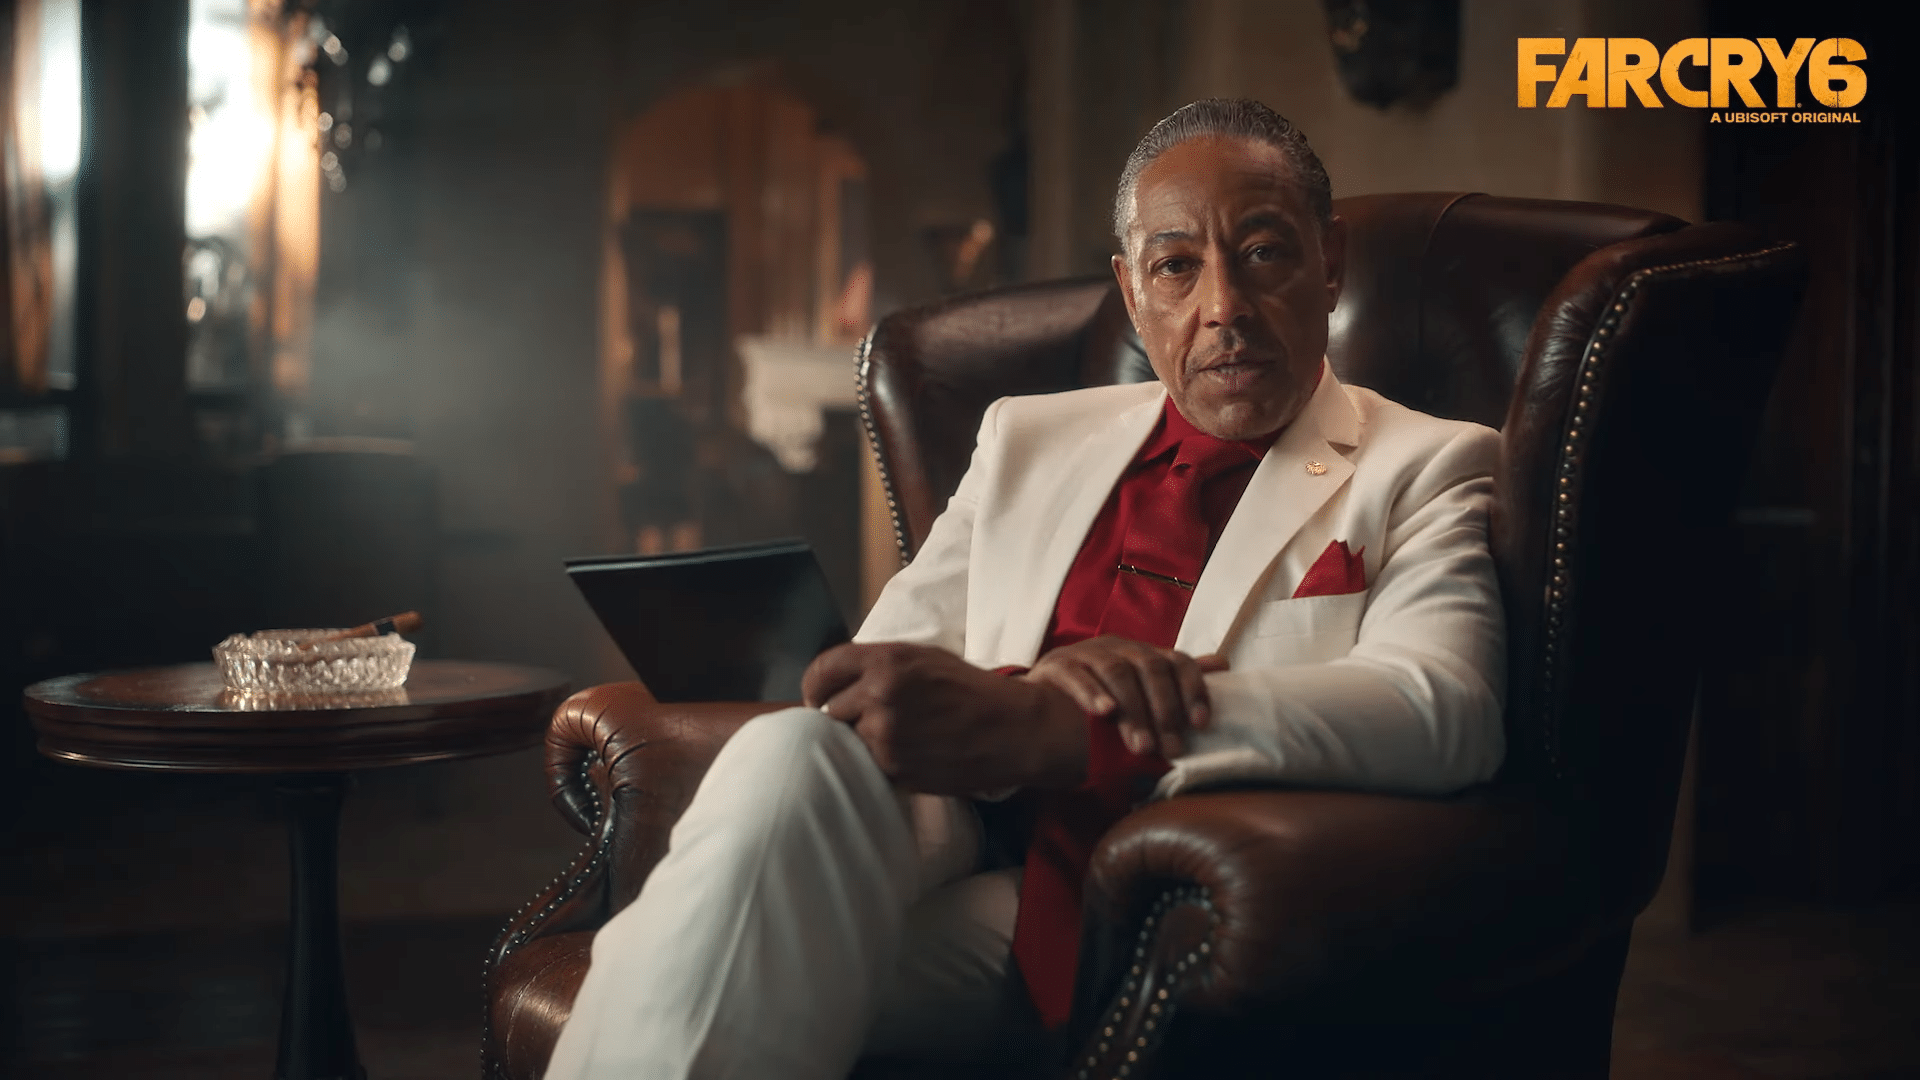 Far Cry 6 Drops 4 Trailers Featuring Giancarlo Esposito Providing Insight into the Upcoming Open-World FPS